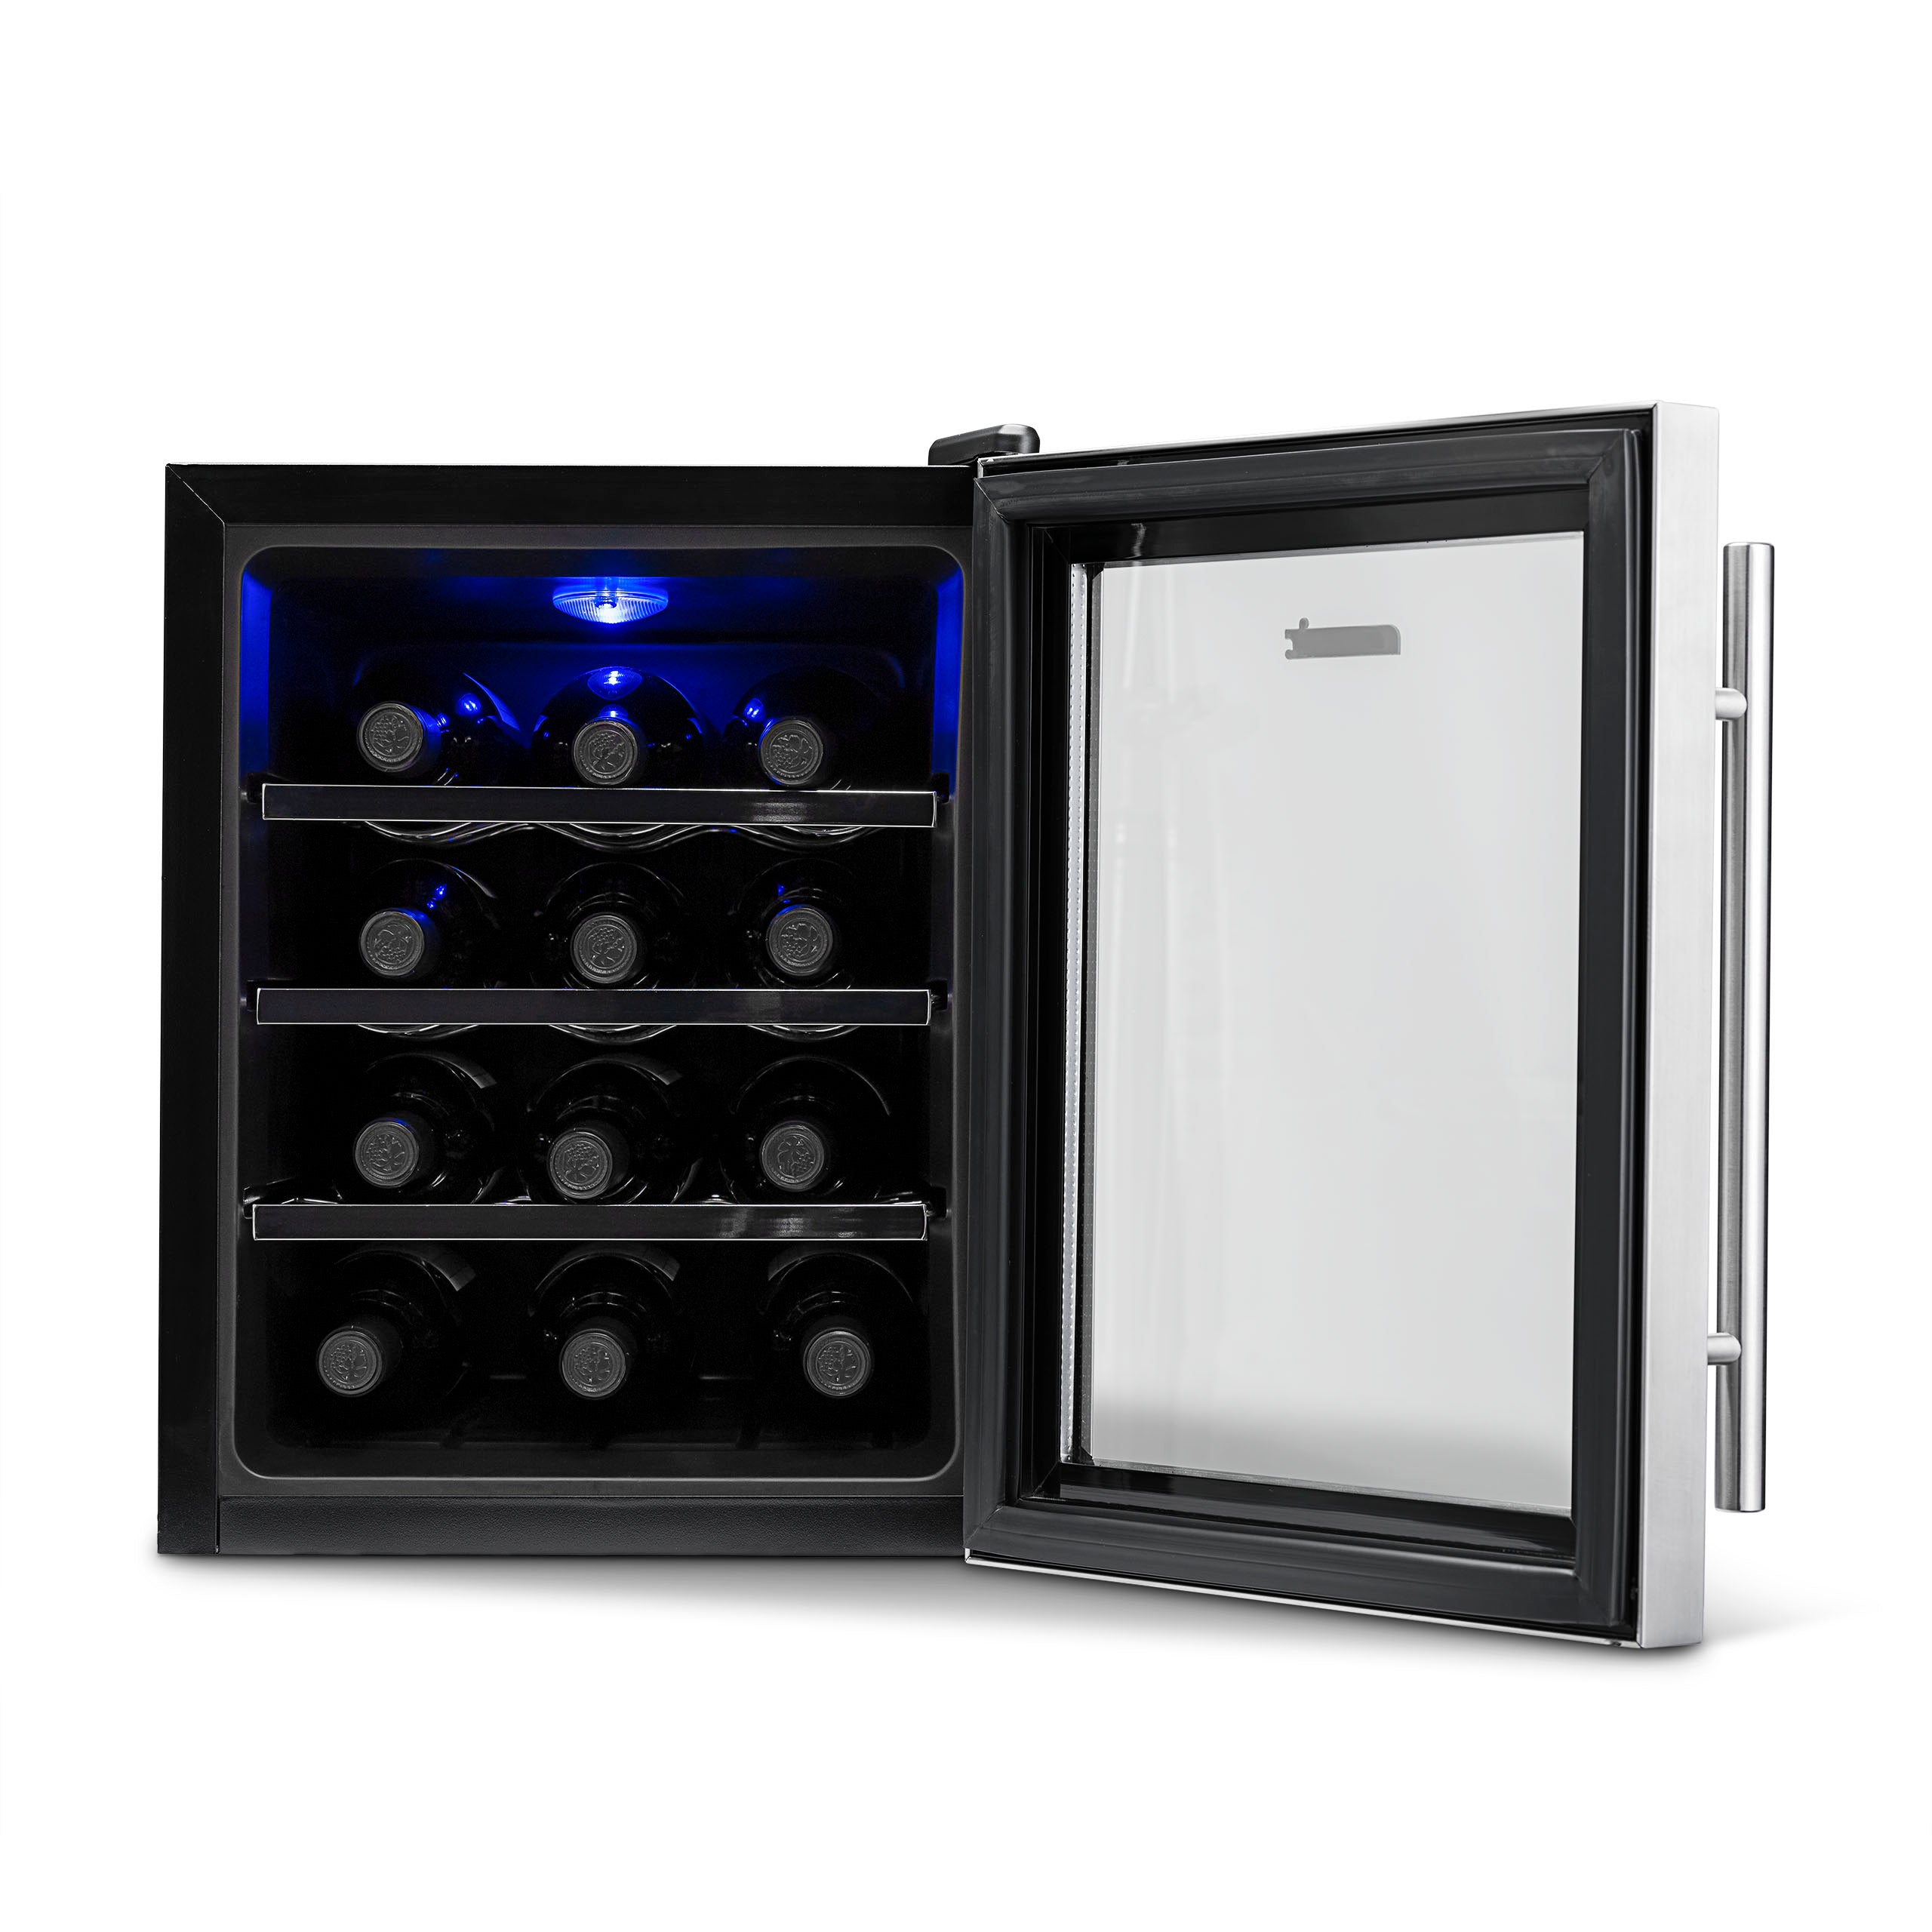 Newair Aw 121e 12 Bottle Wine Fridge Countertop Thermoelectric